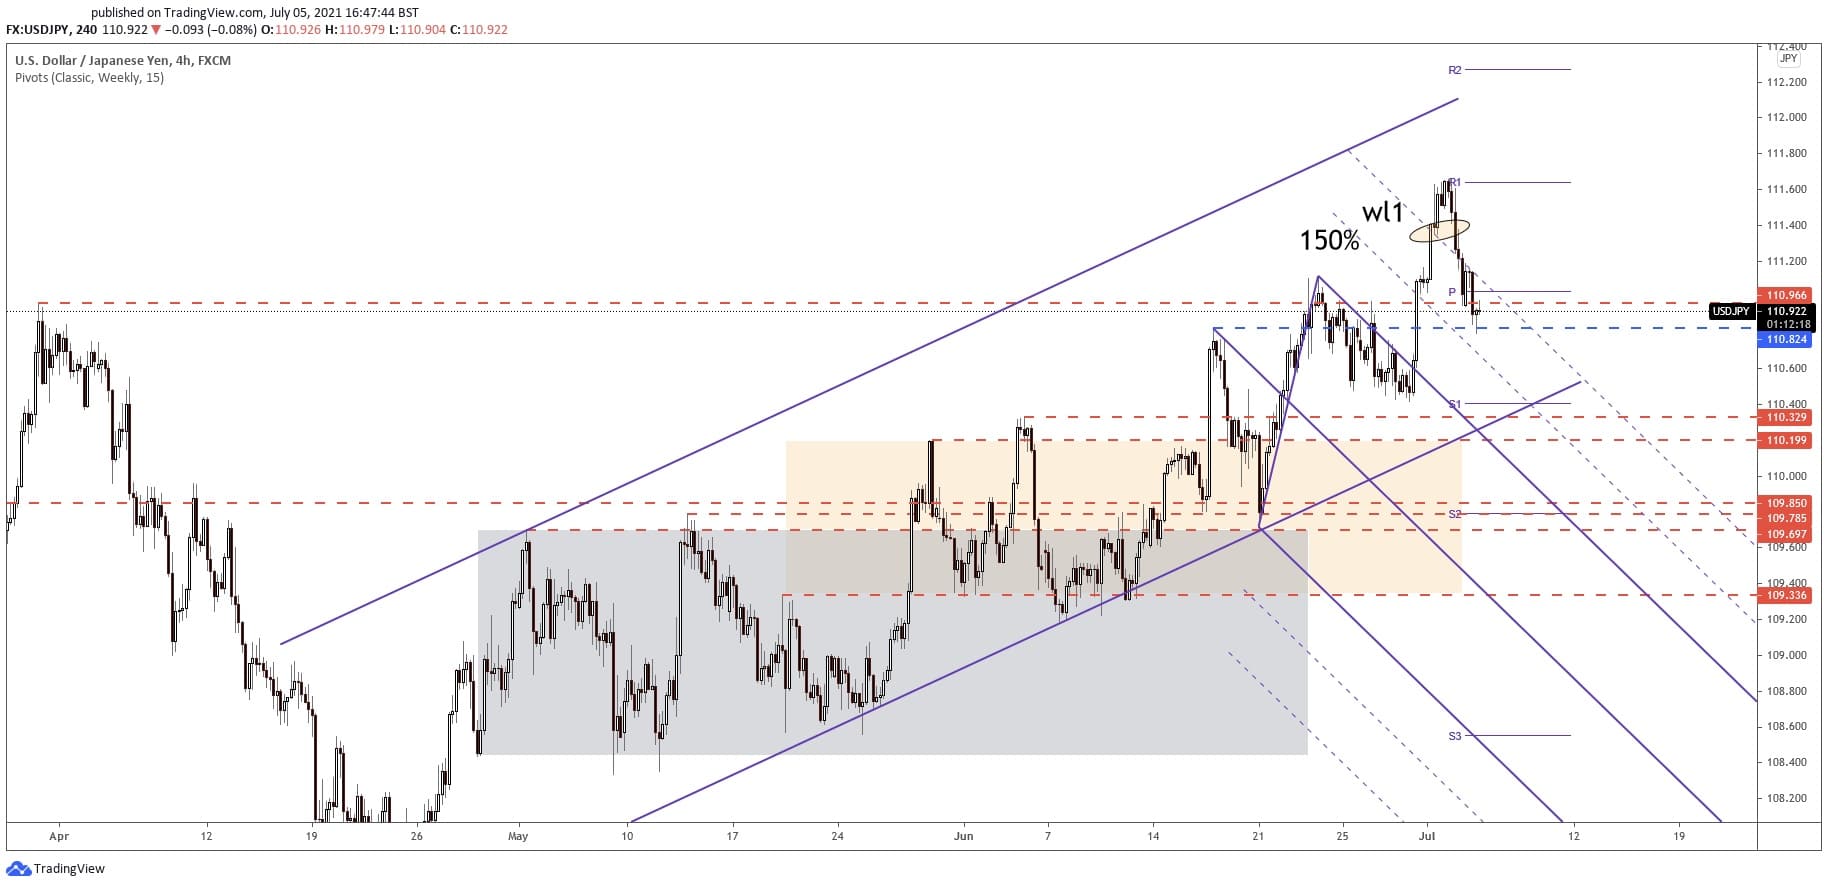 usdjpy forecast and price chart 5 july 2021